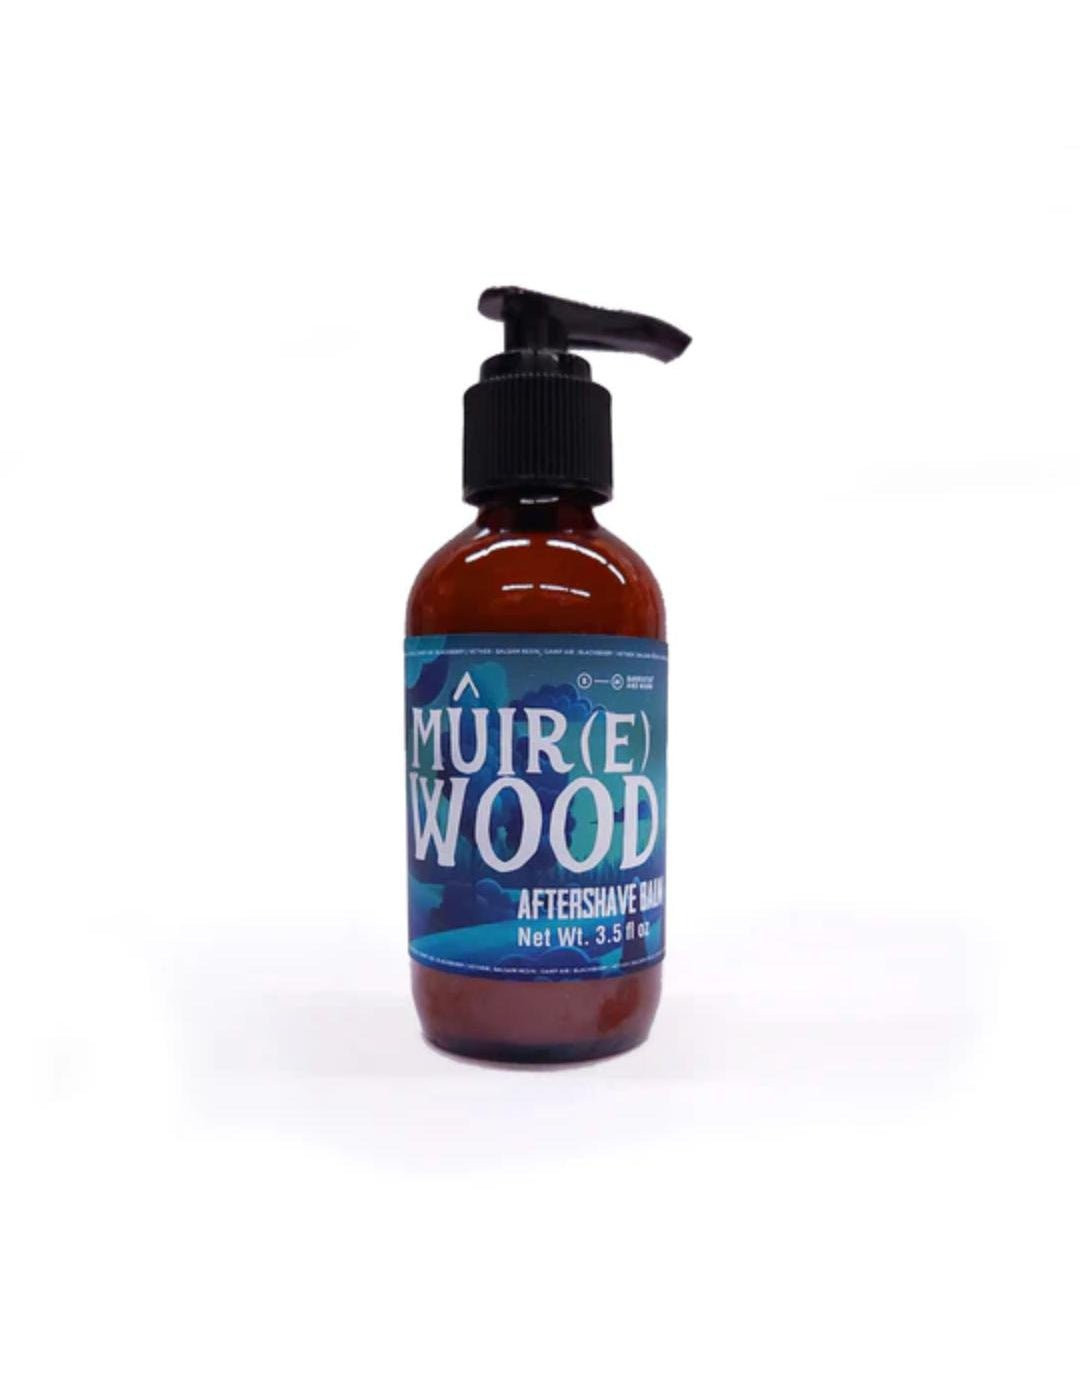 Product image 0 for Barrister and Mann After Shave Balm, Muir(e) Wood